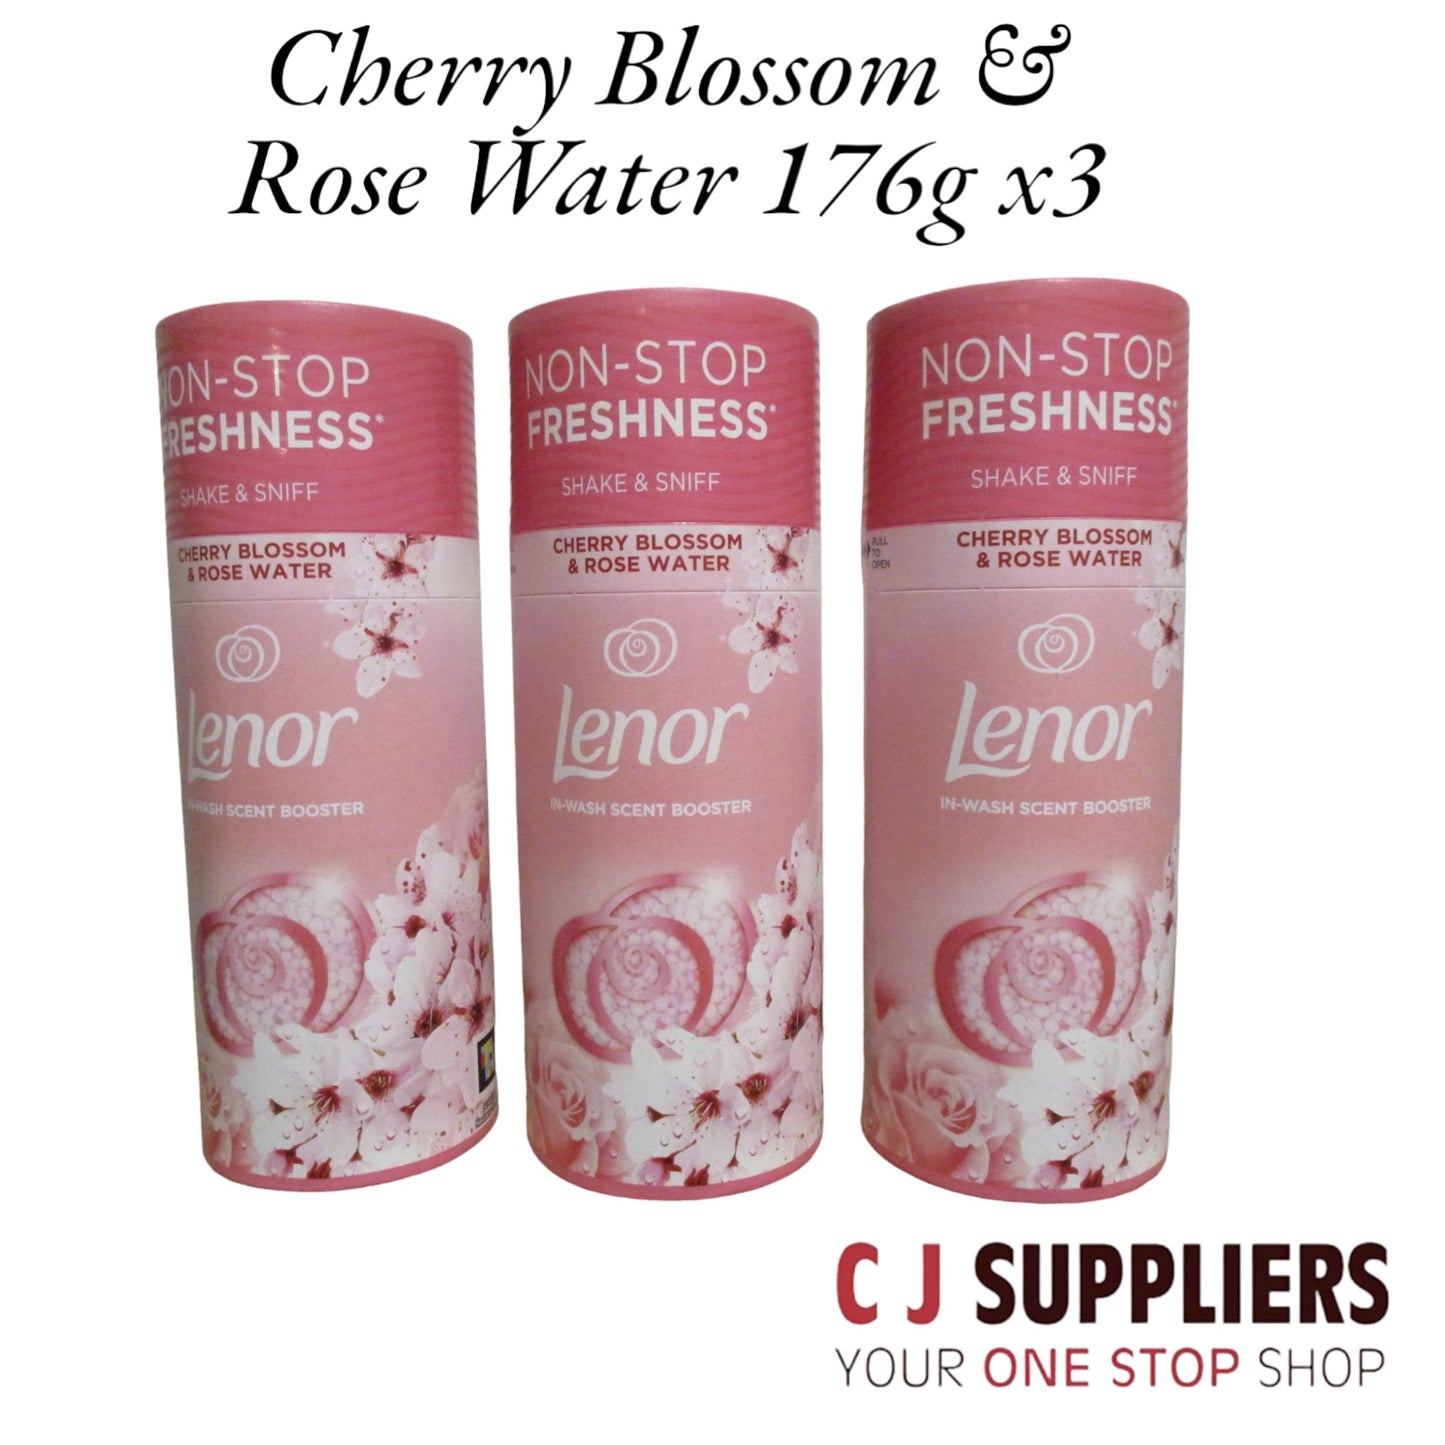 Lenor Beads In-Wash Scent Booster, 3 x 176g Pack's, (Cherry Blossom & Rose Water)